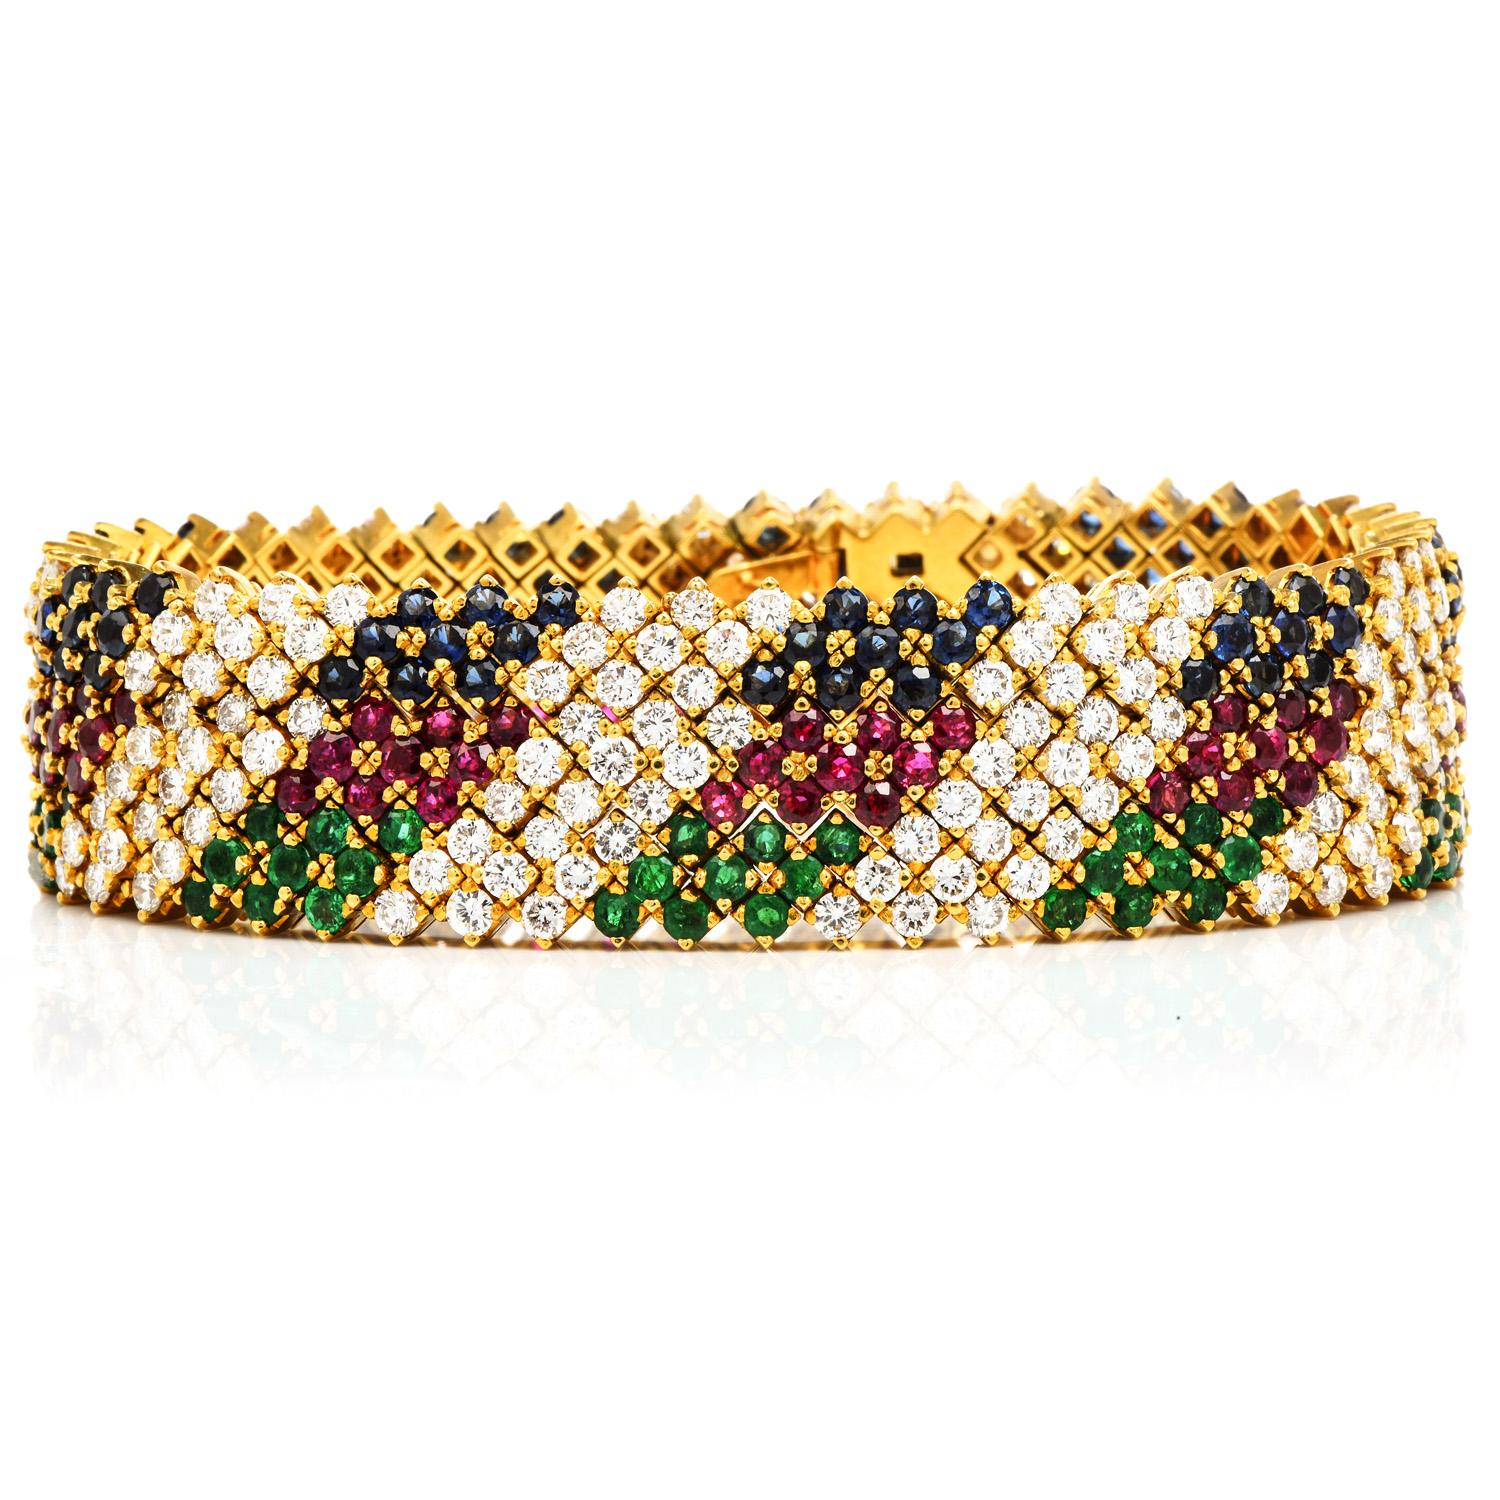 Vintage Reto 1980s Cluster style link three Stackable bracelets Set in 18k yellow gold.

Each Brecelets are Enhanced in the center with an alternate triple row of Diamonds, Blue Sapphires, and Emerald & Rubies, adding sparkle and deep color to the